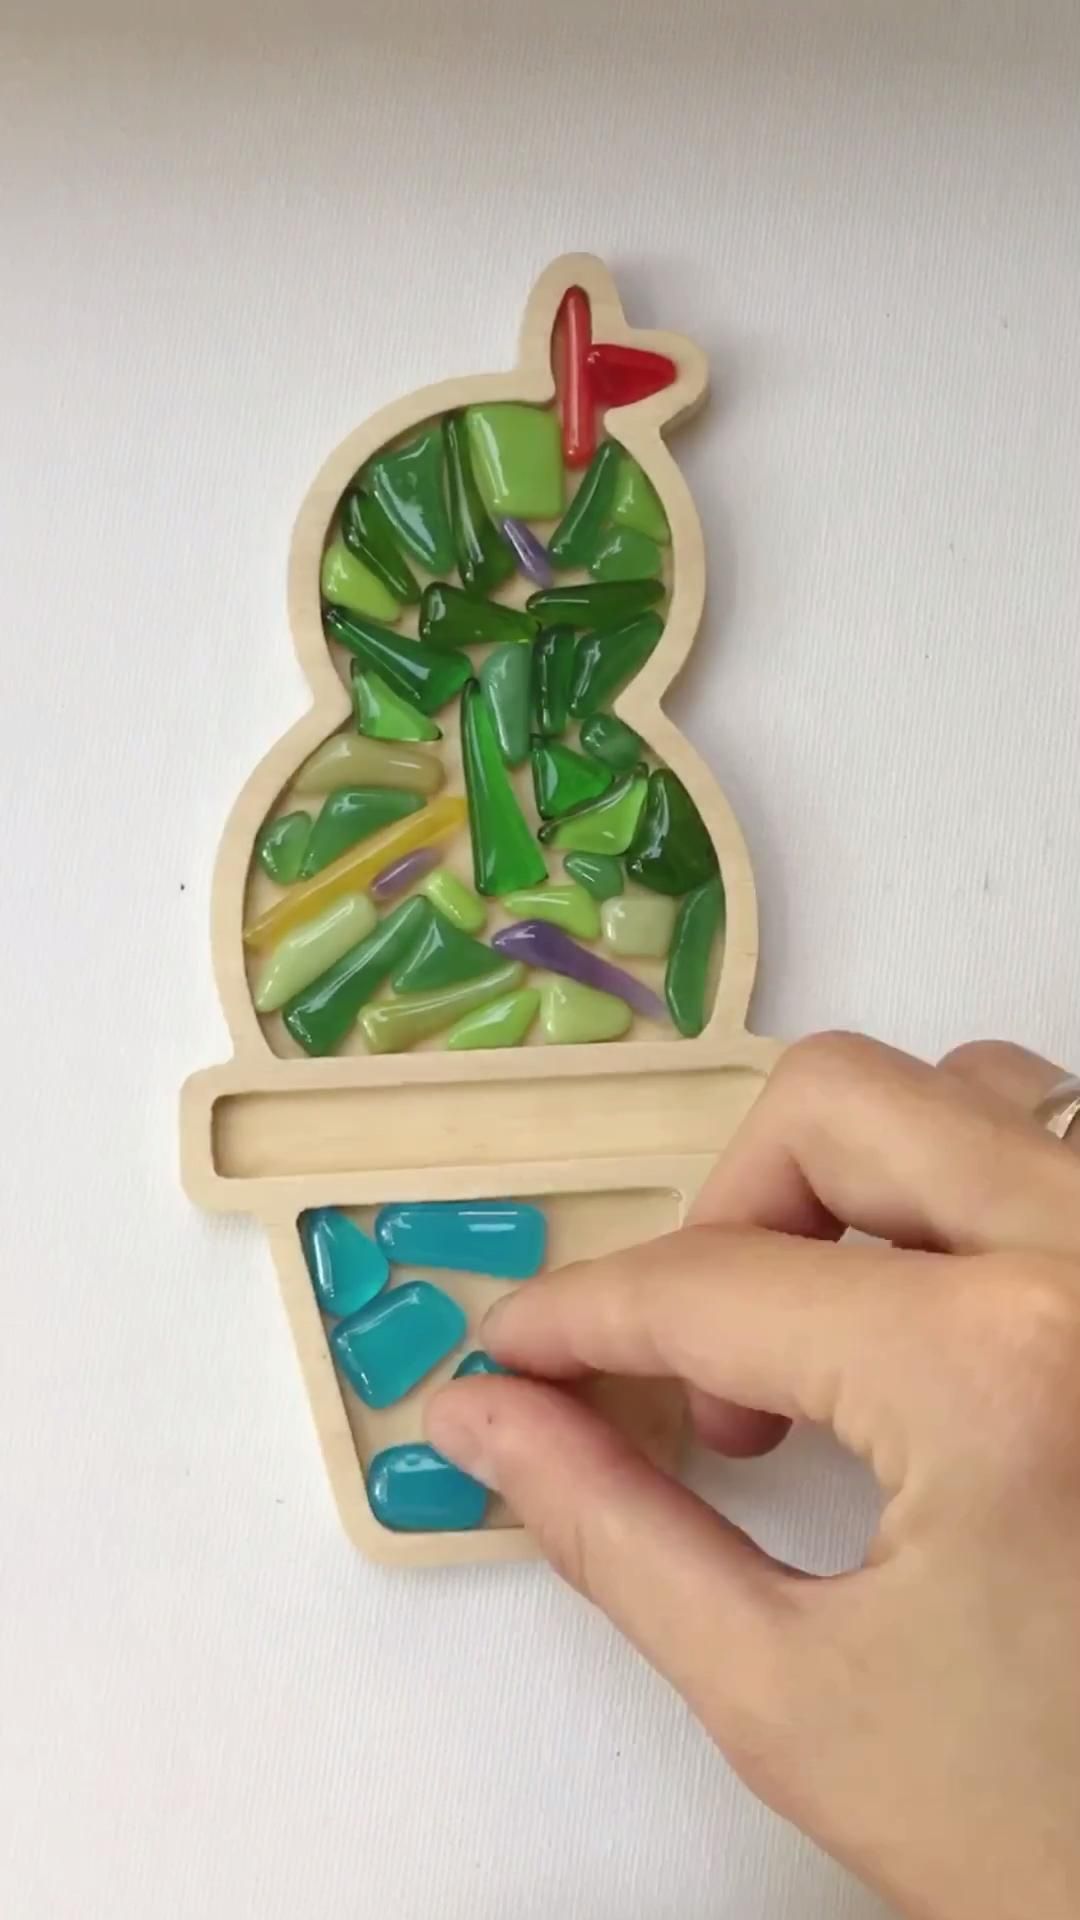 Stained glass art project for kids -   13 diy projects for kids ideas